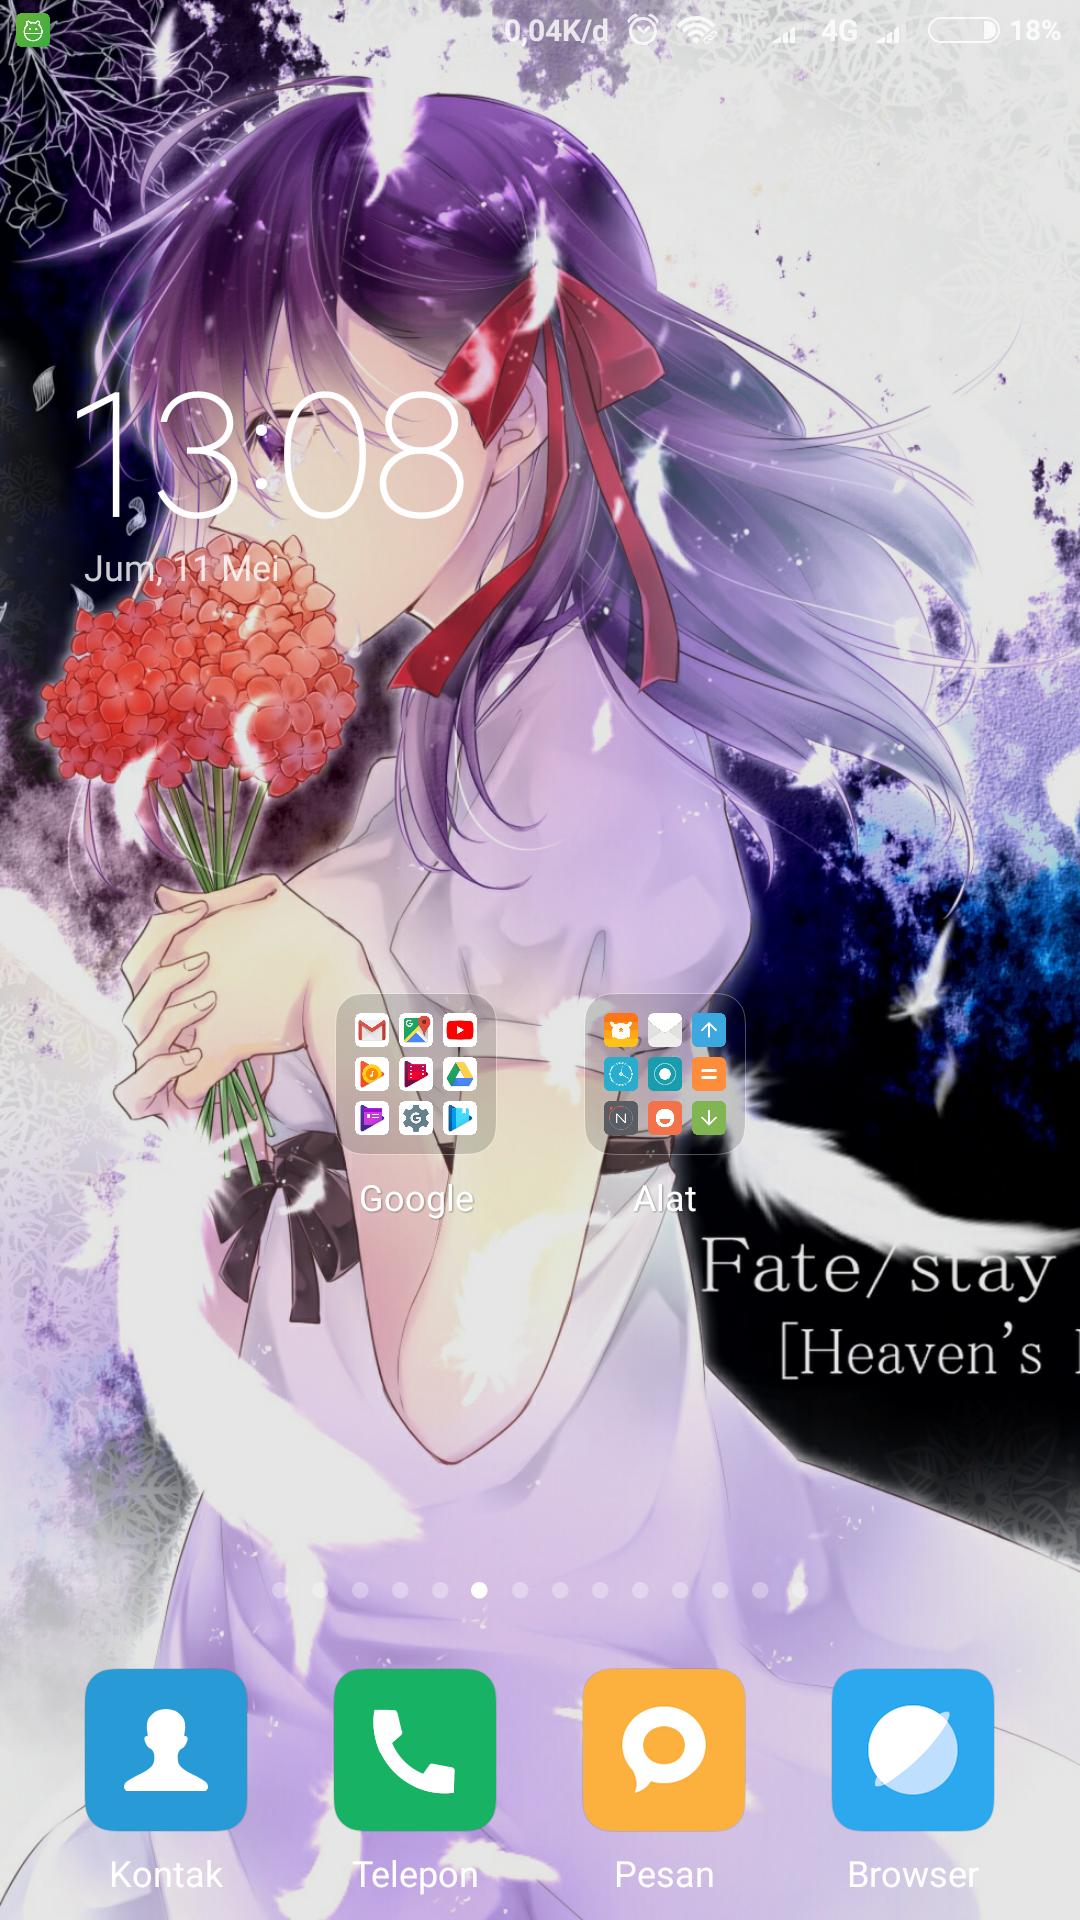 Android 用の Fate Stay Heaven Fell Wallpaper Apk をダウンロード